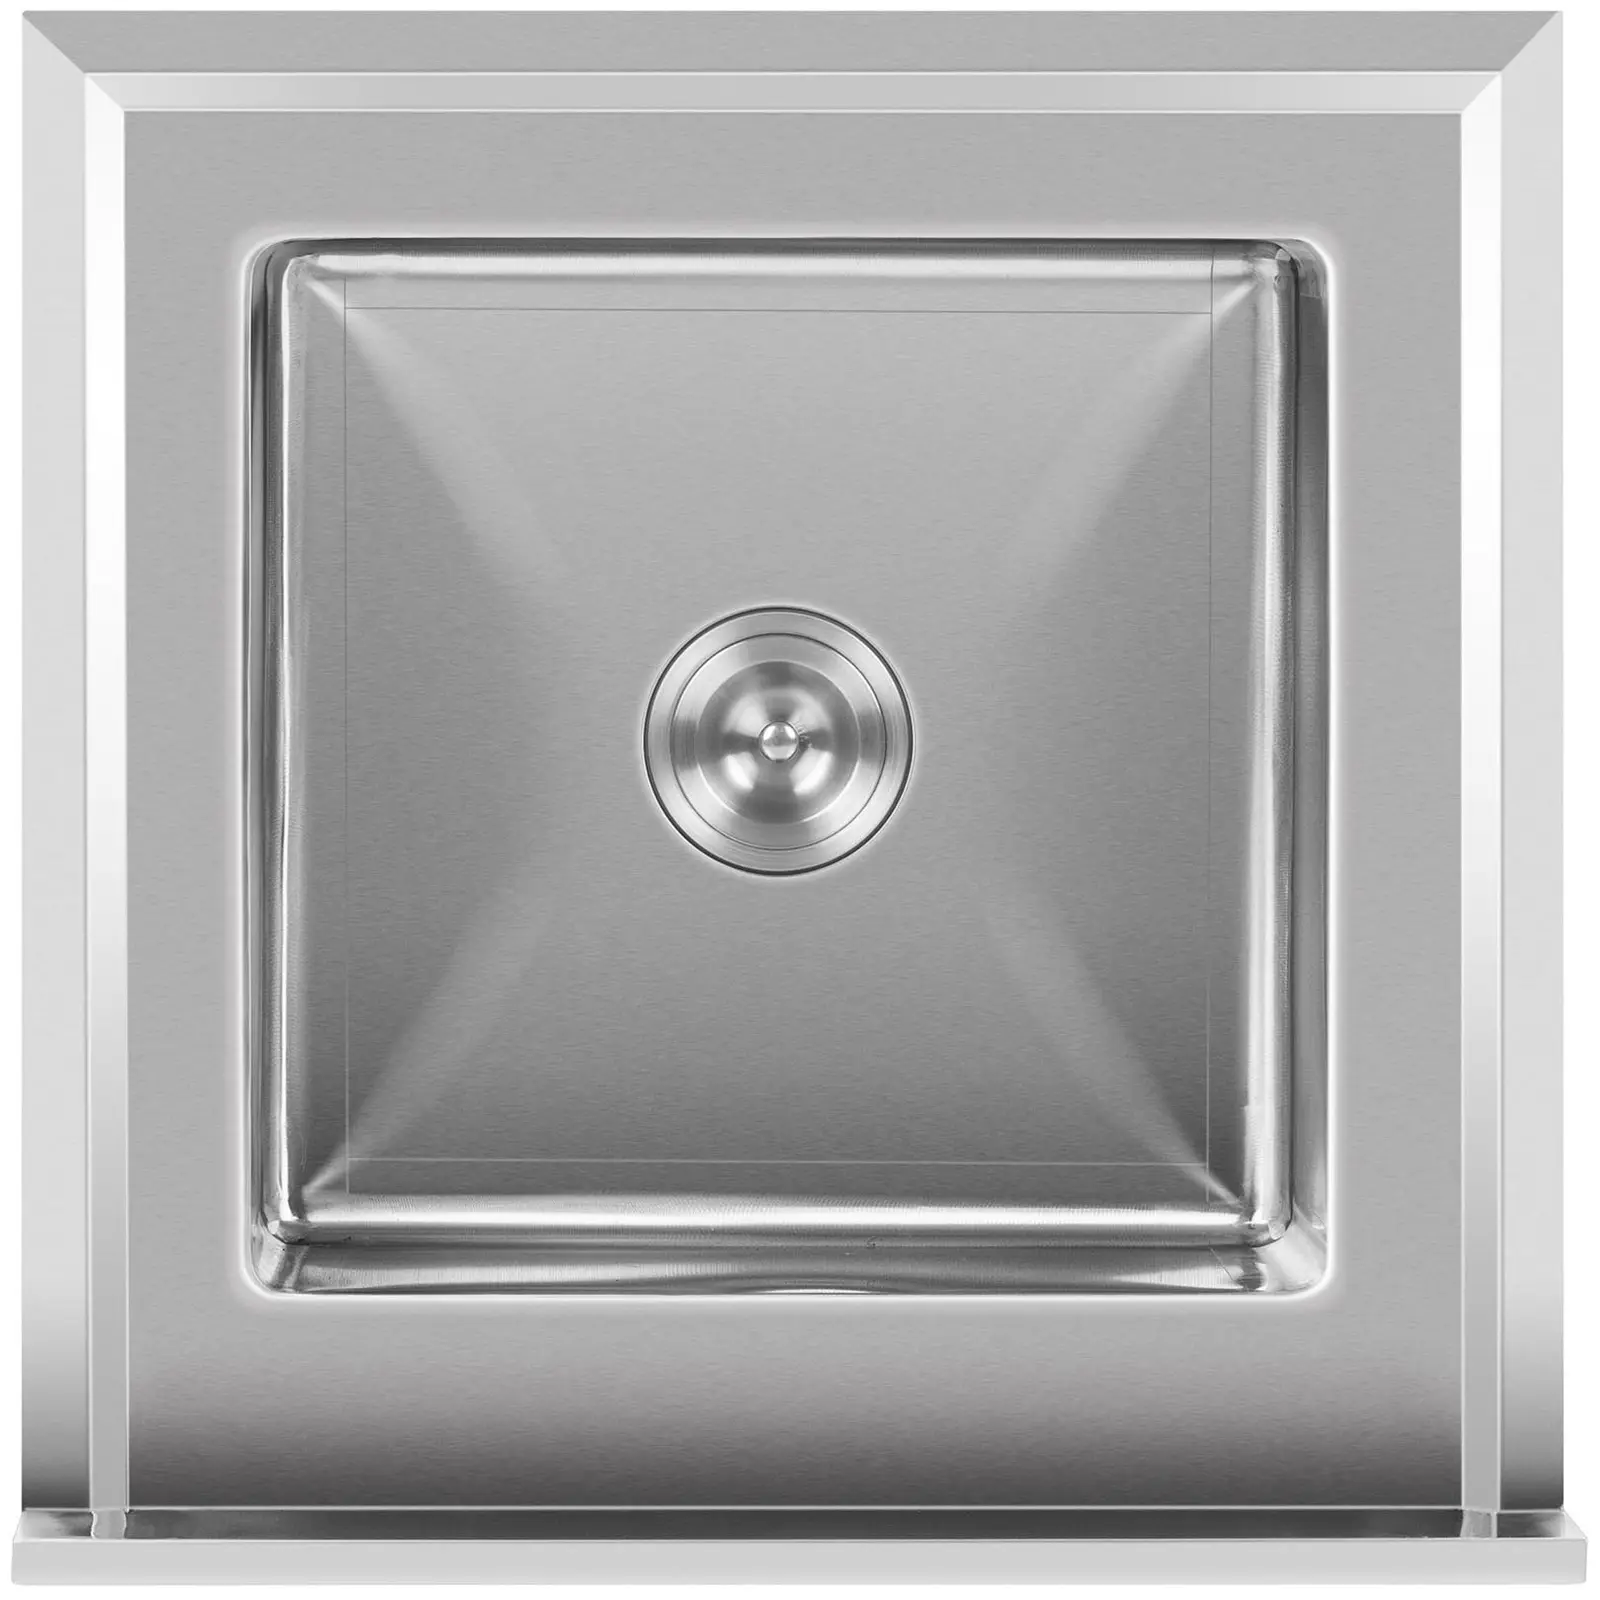 Commercial Kitchen Sink - 1 basin - stainless steel - 40 x 40 x 25.5 cm